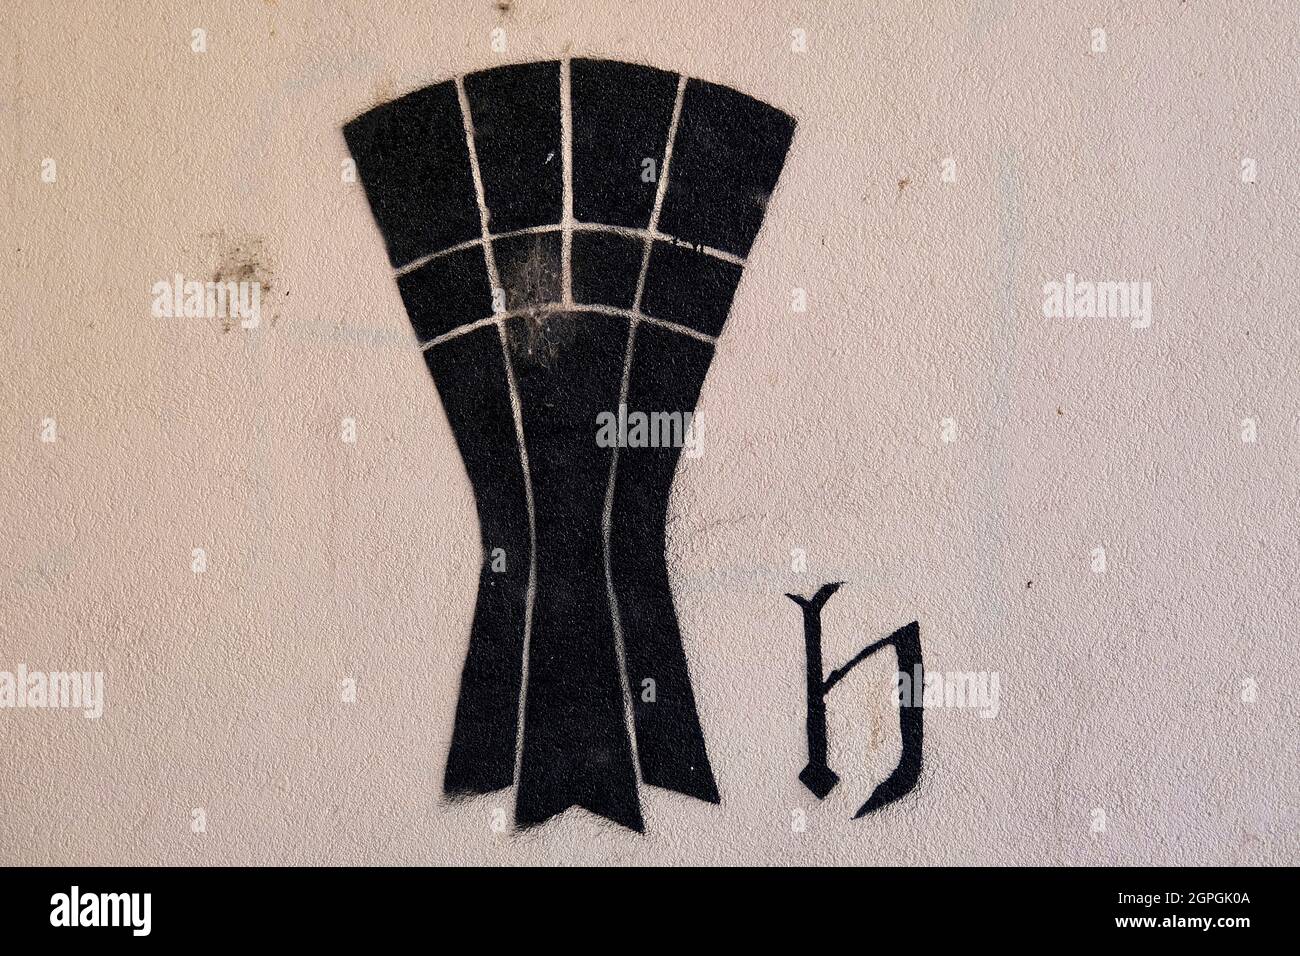 Croatia, Slavonia, Vukovar, tag representing the water tower, symbol of the resistance of the city against the enemy during the siege of Vukovar in 1991 Stock Photo